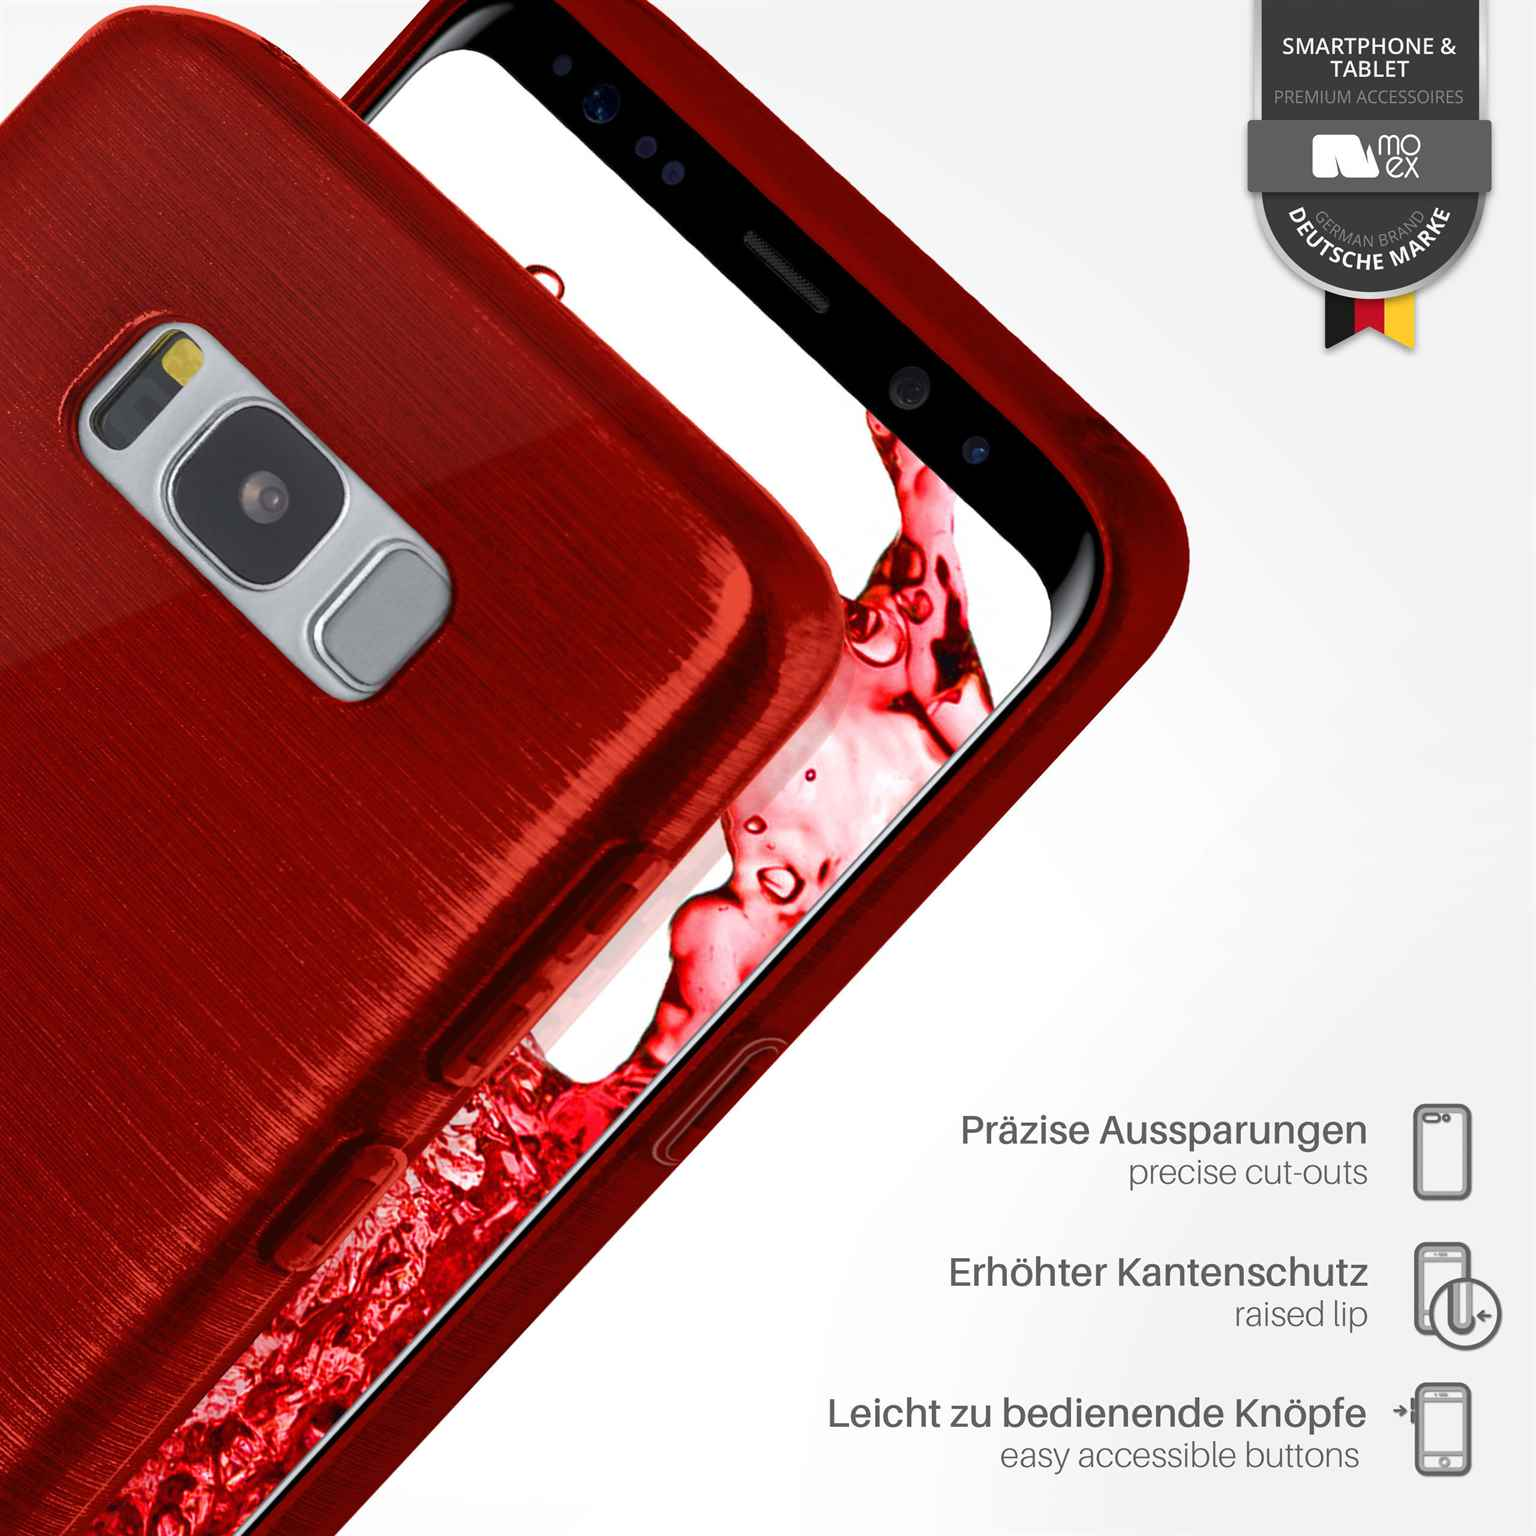 Crimson-Red Plus, S8 Brushed MOEX Backcover, Galaxy Samsung, Case,